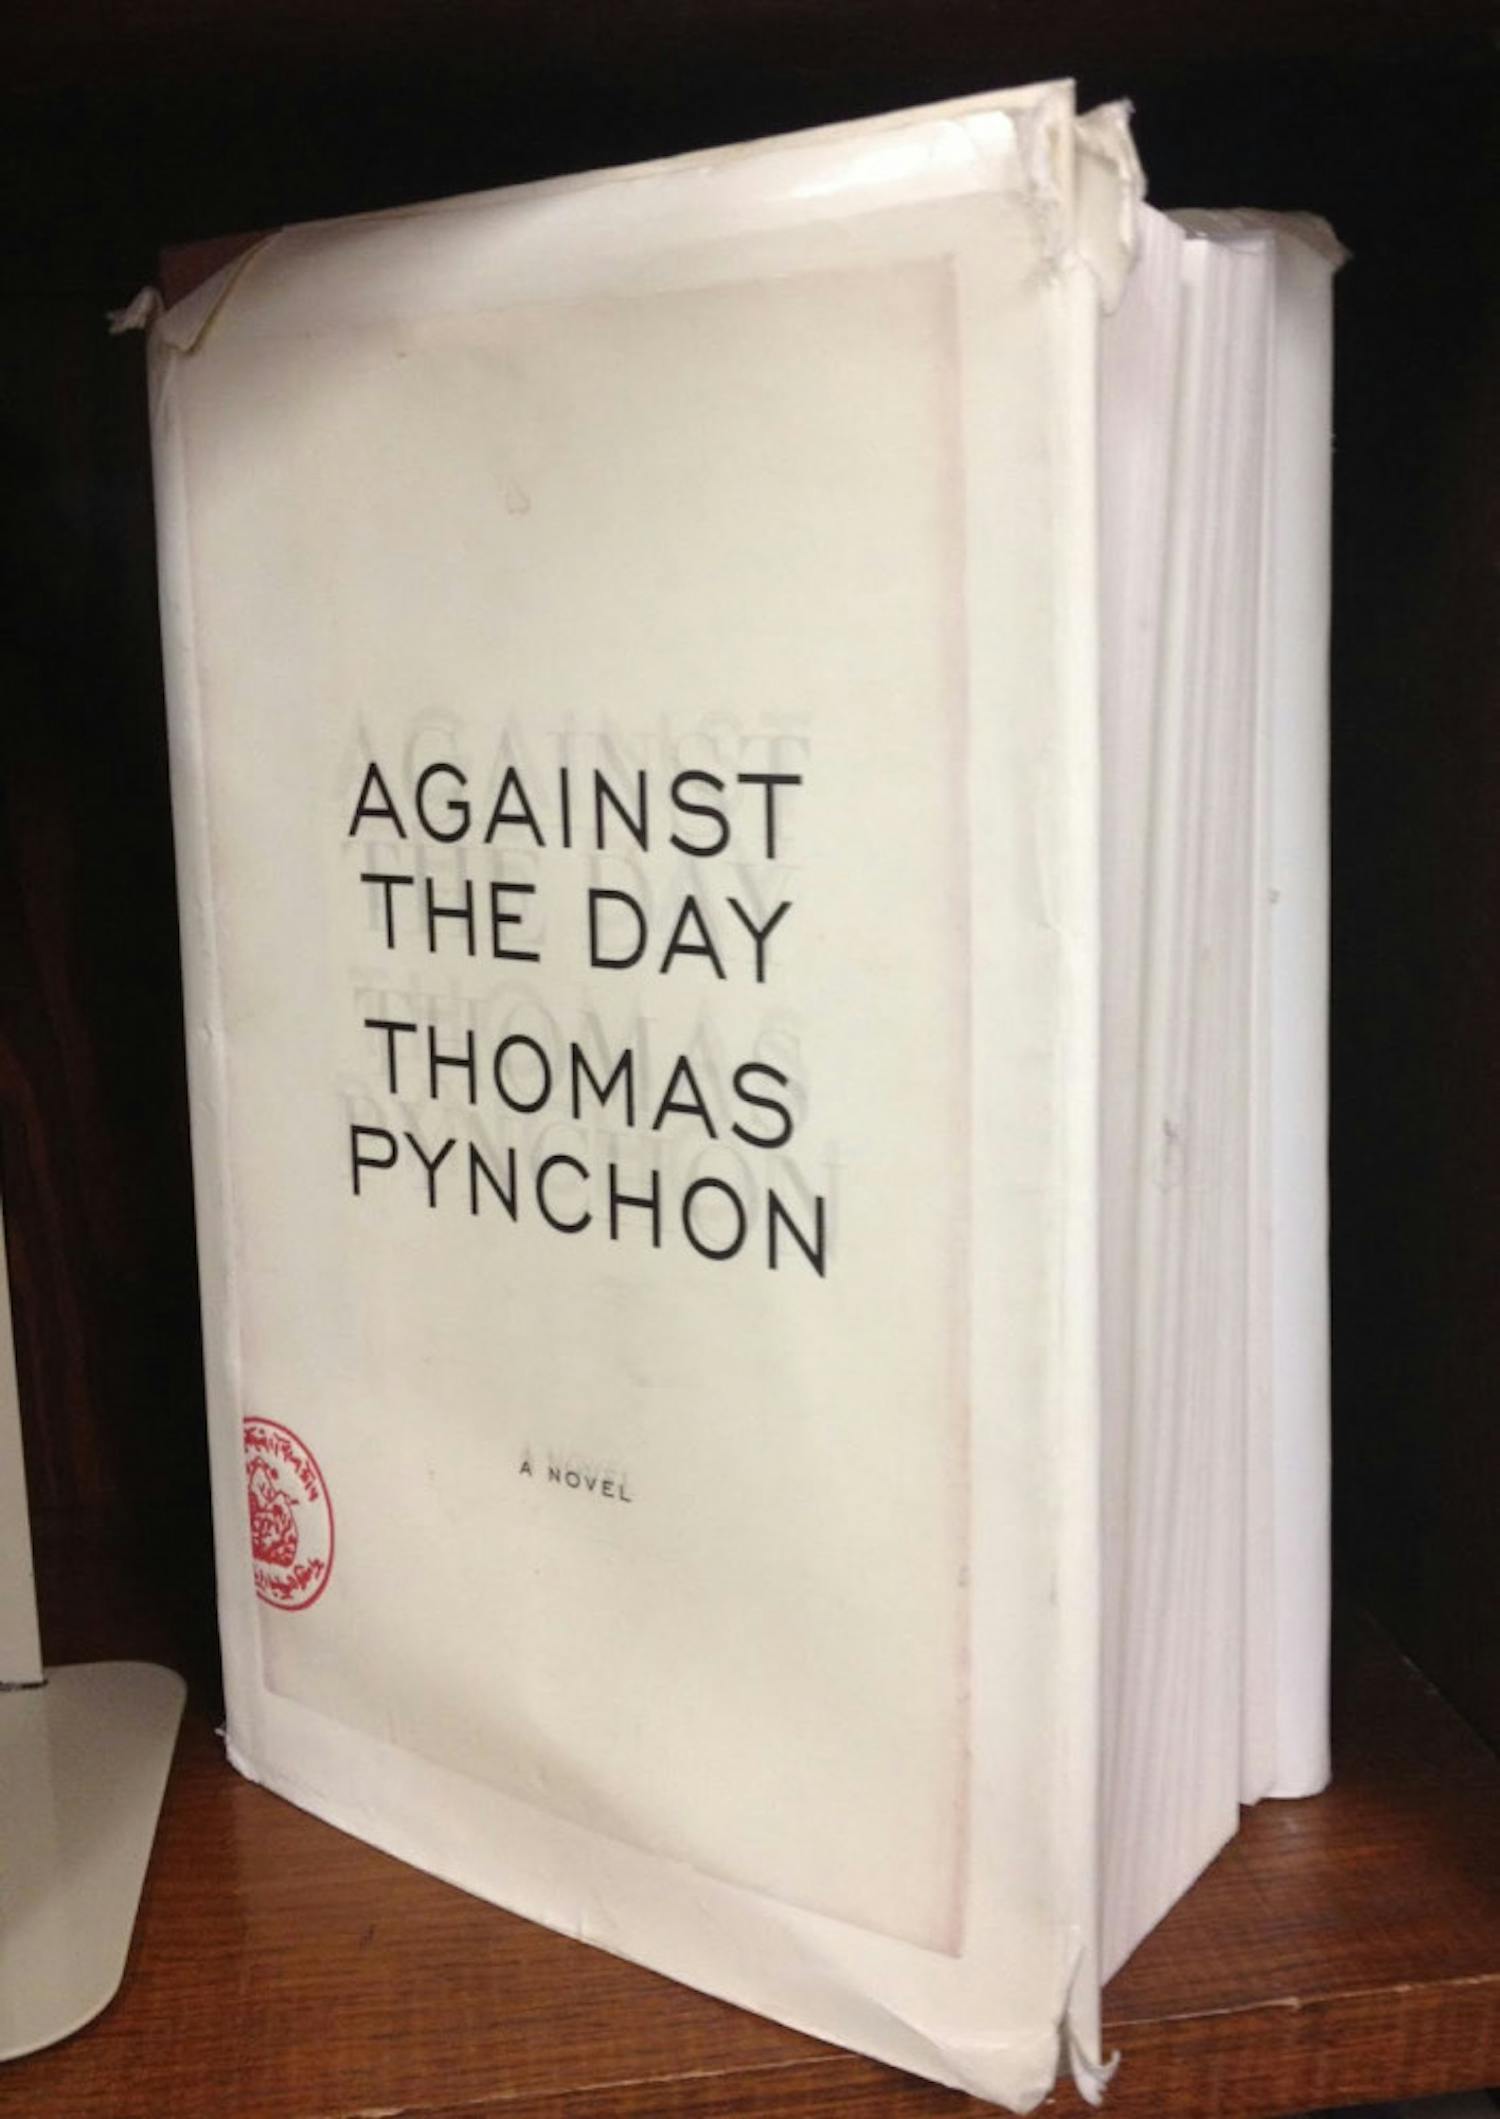 Against the Day, by Thomas Pynchon$3